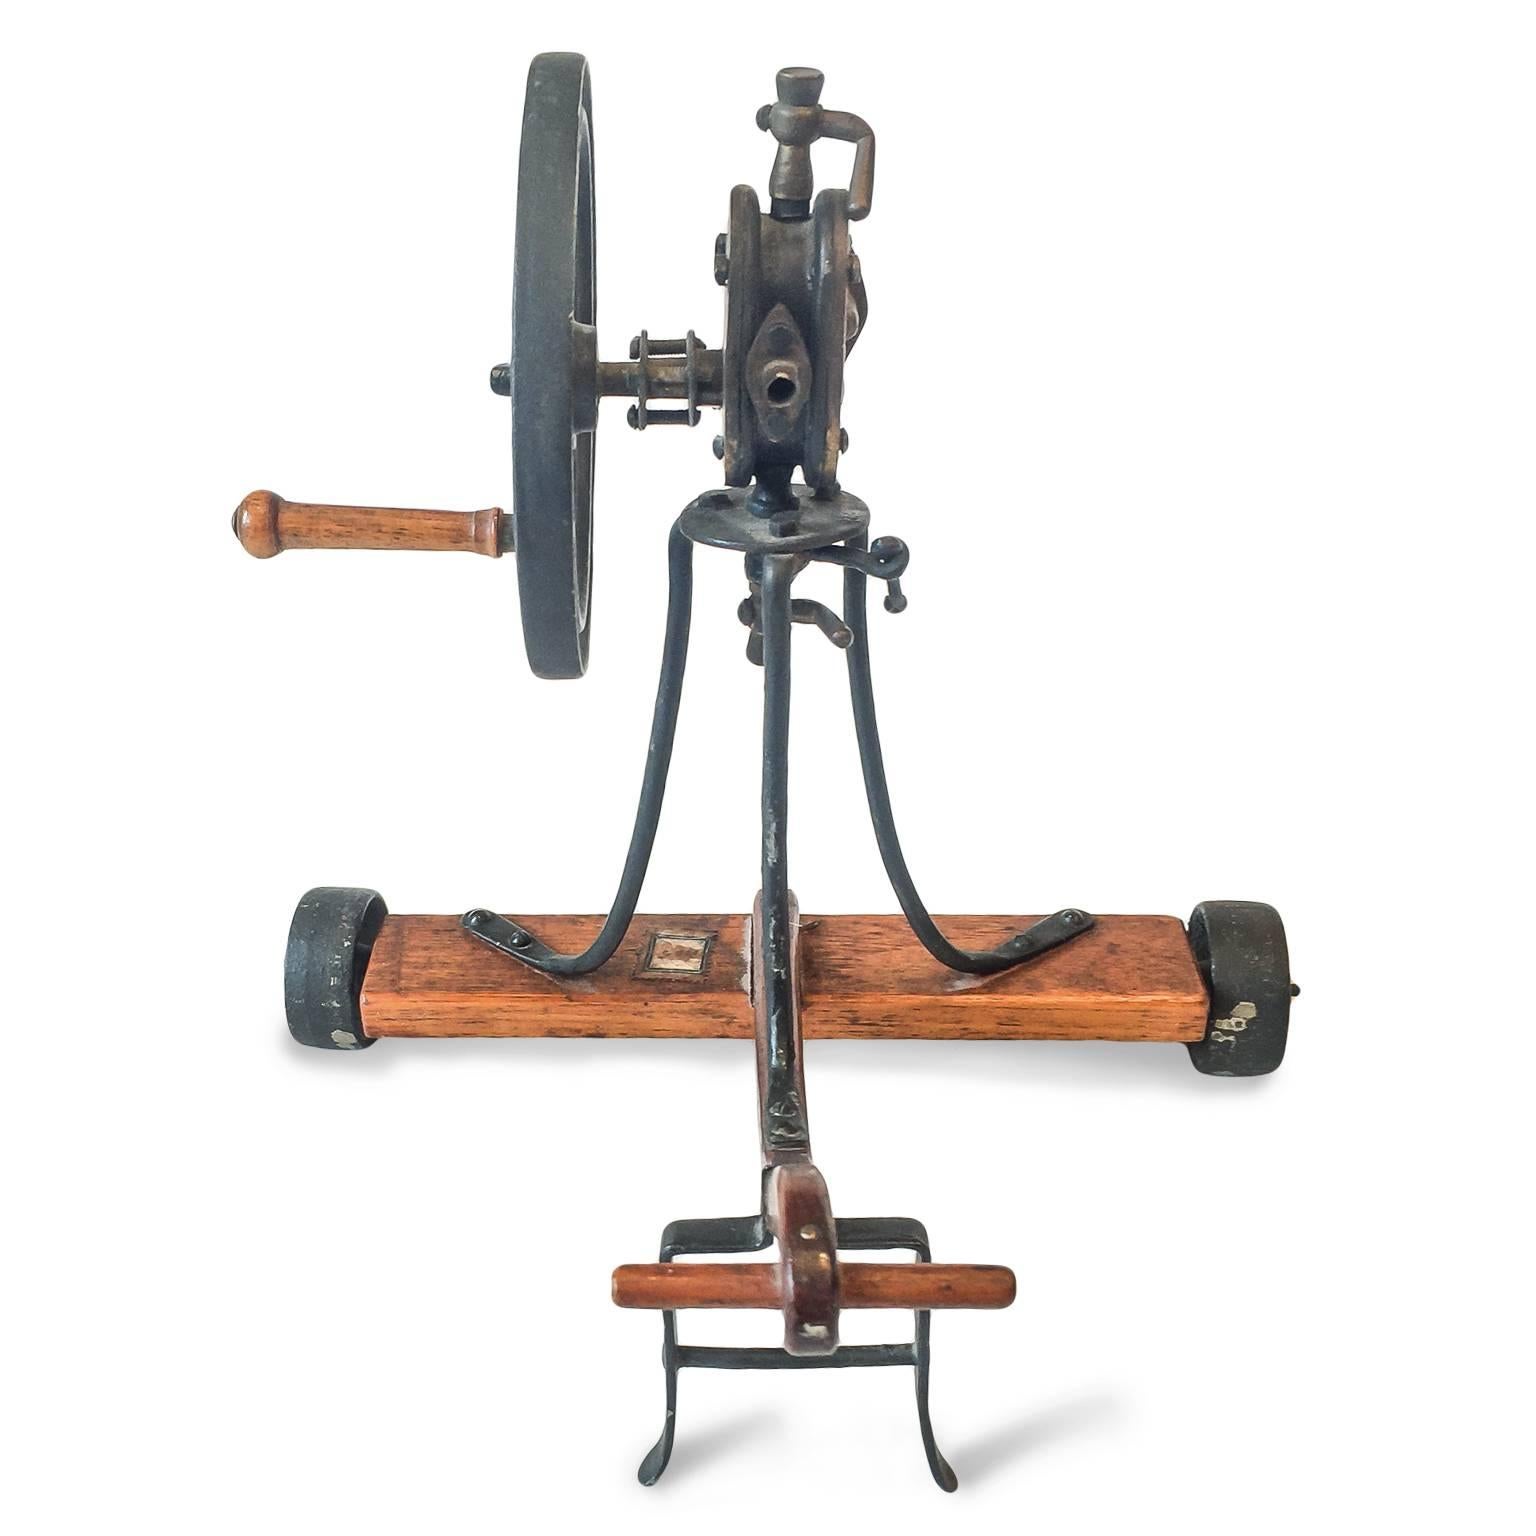 A rare Model of Hydraulic Pump for Irrigation probably made for educational use as suggested by the scale, ten inches high, and the inventory numbers of the paper label. The iron pump was realized at the late 19th century, as both threads and small